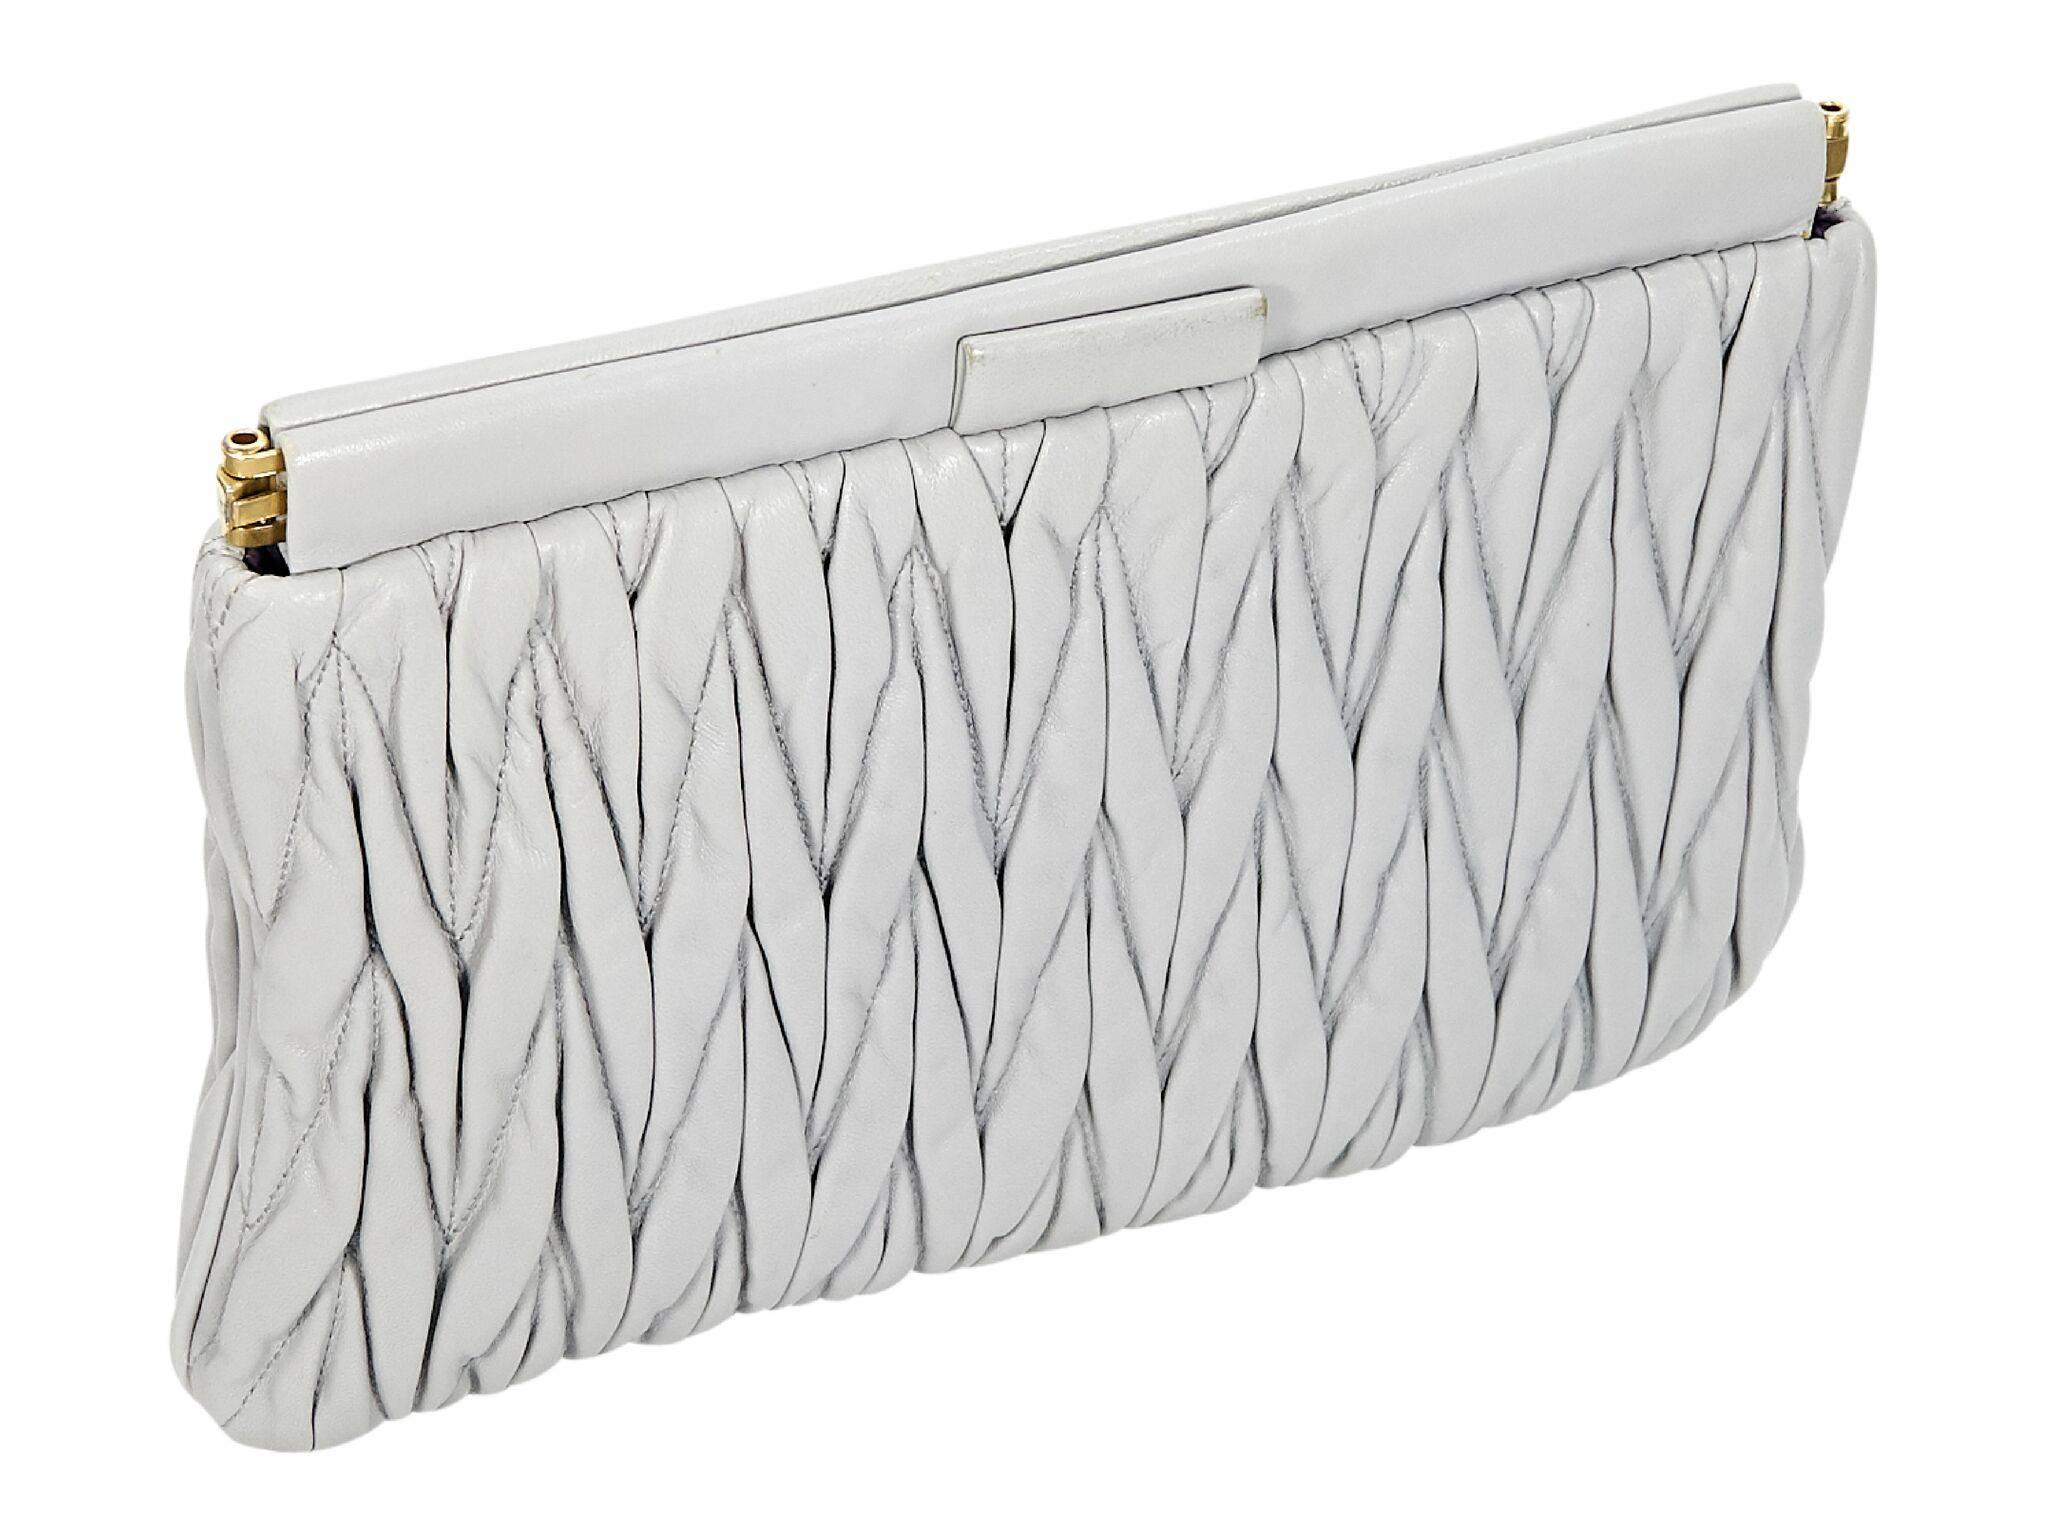 Product details:  Light grey leather matelasse clutch by Miu Miu.  Hinged top closure.  Lined interior with inner slide pocket.  Goldtone hardware.  11